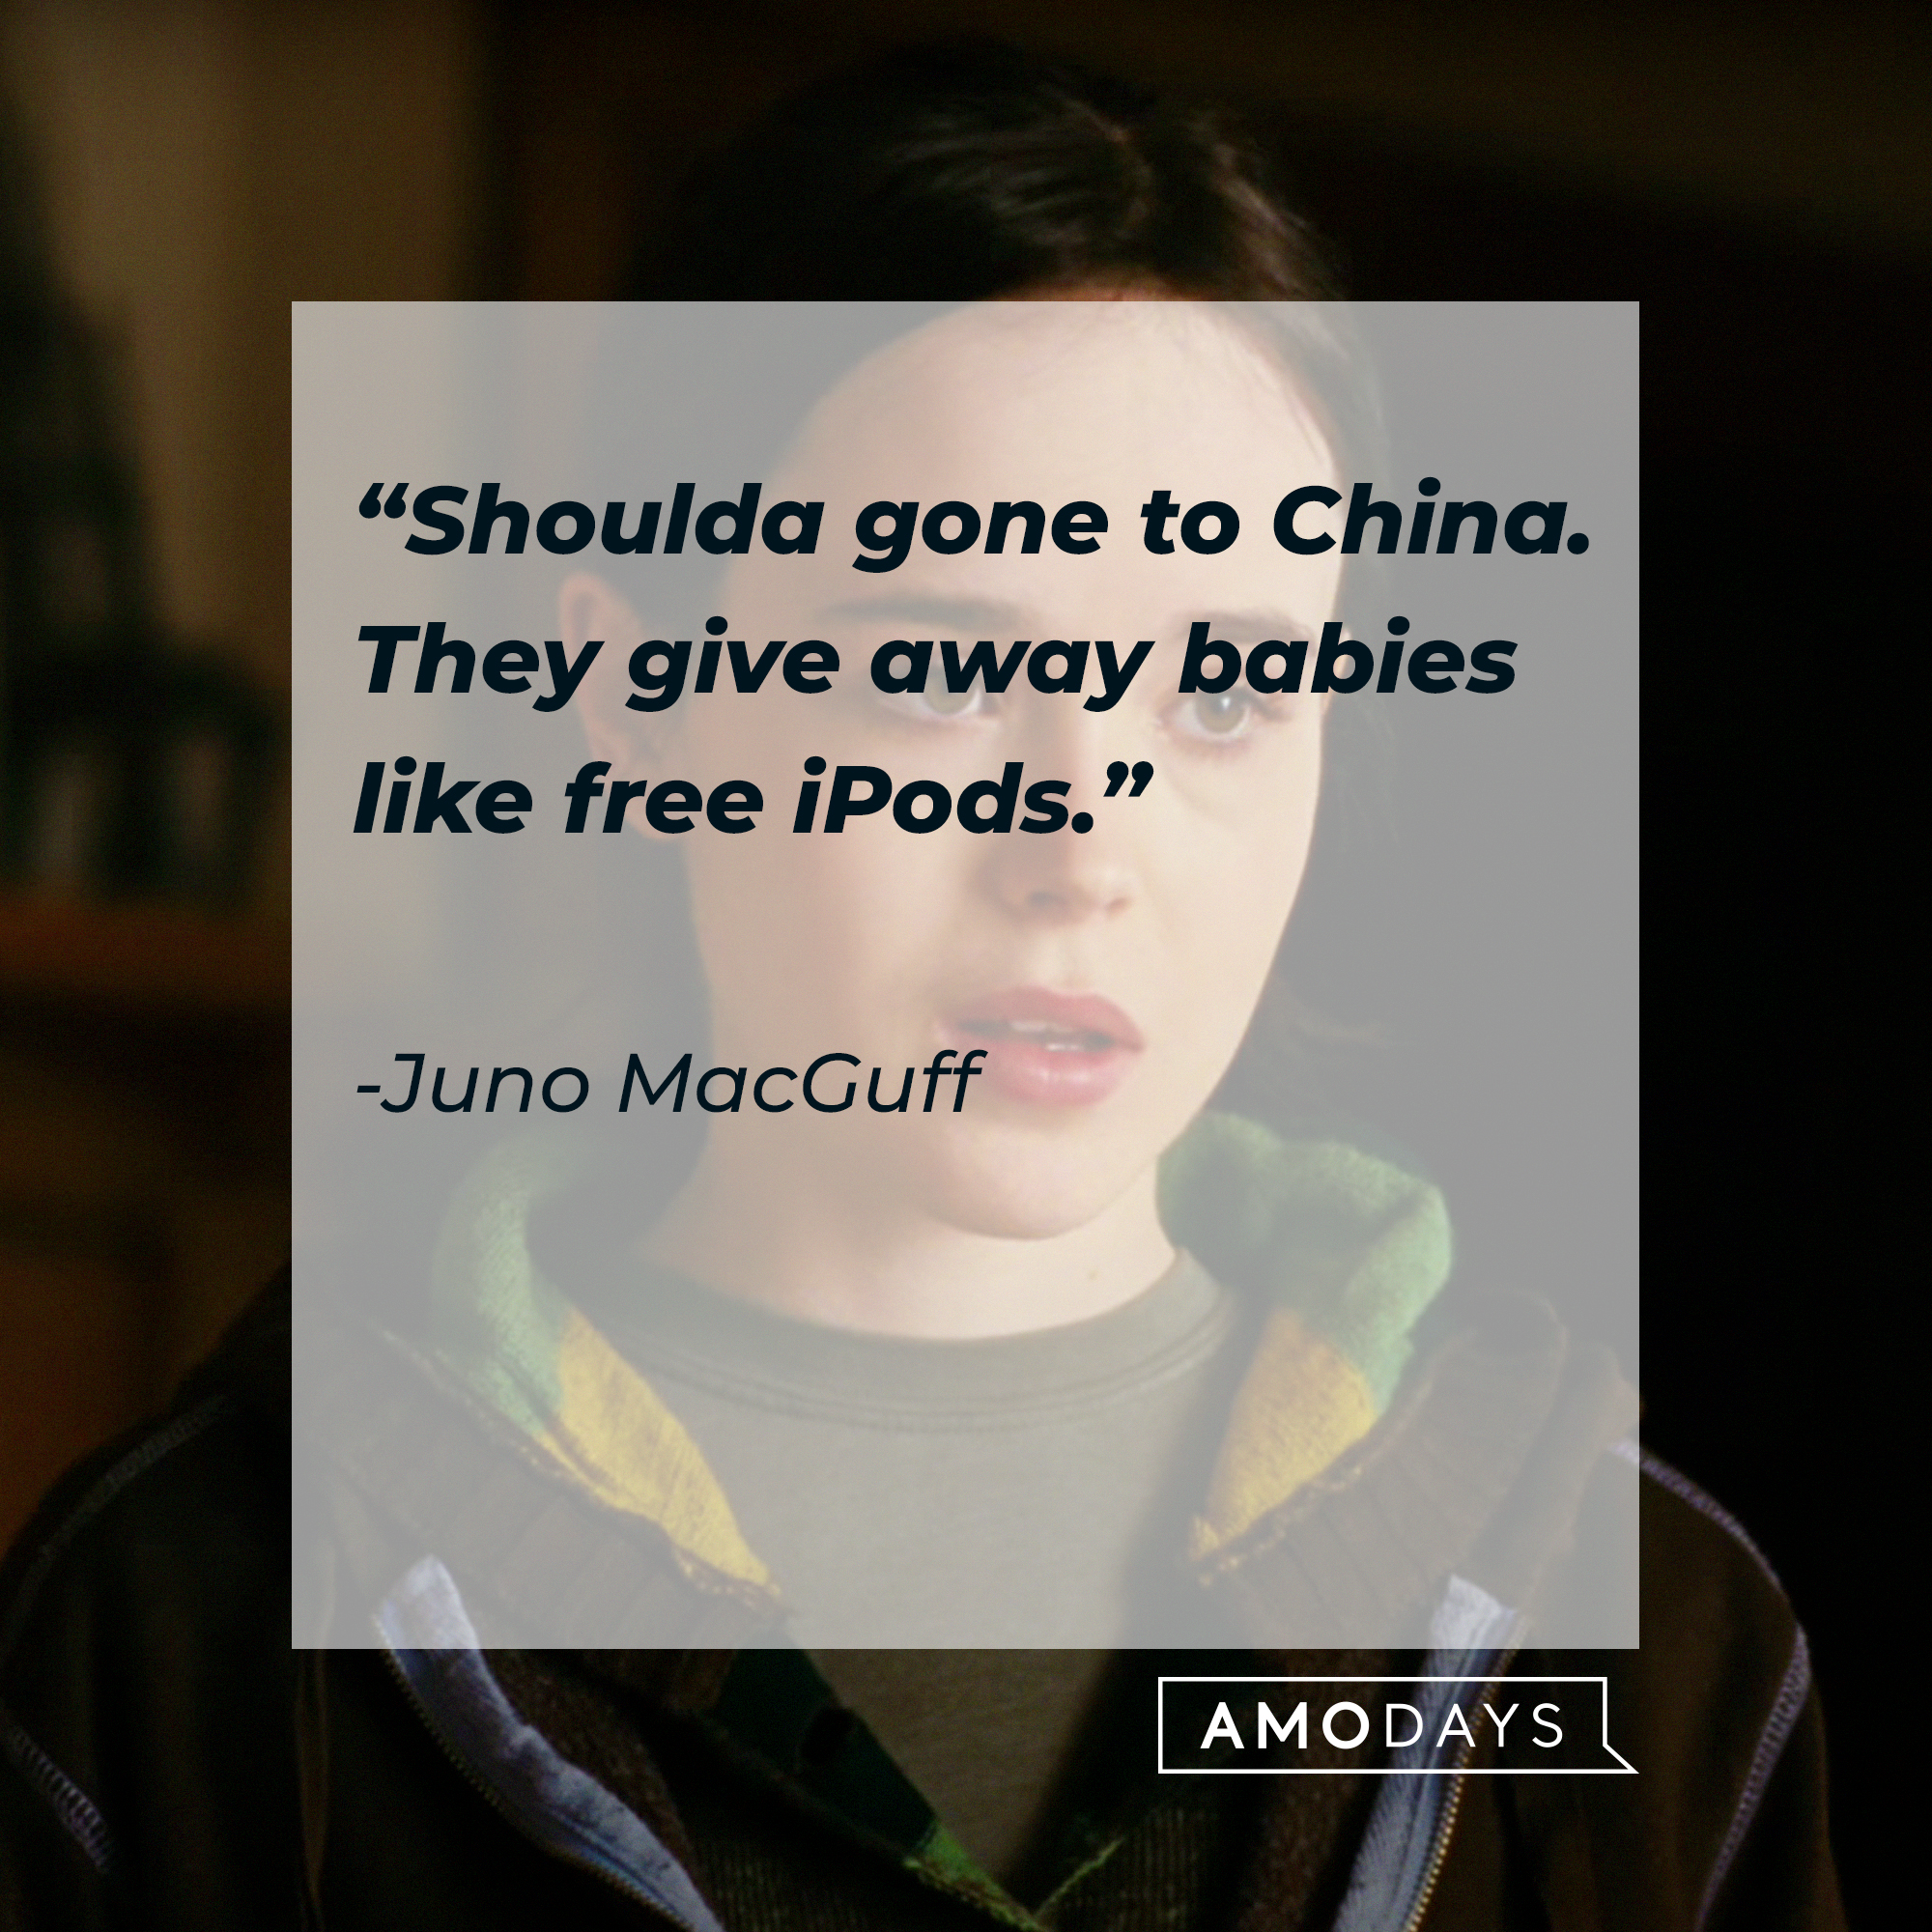 Juno MacGuff, with her quote: “Shoulda gone to China. They give away babies like free iPods.” | Source: Facebook.com/JunoTheMovie